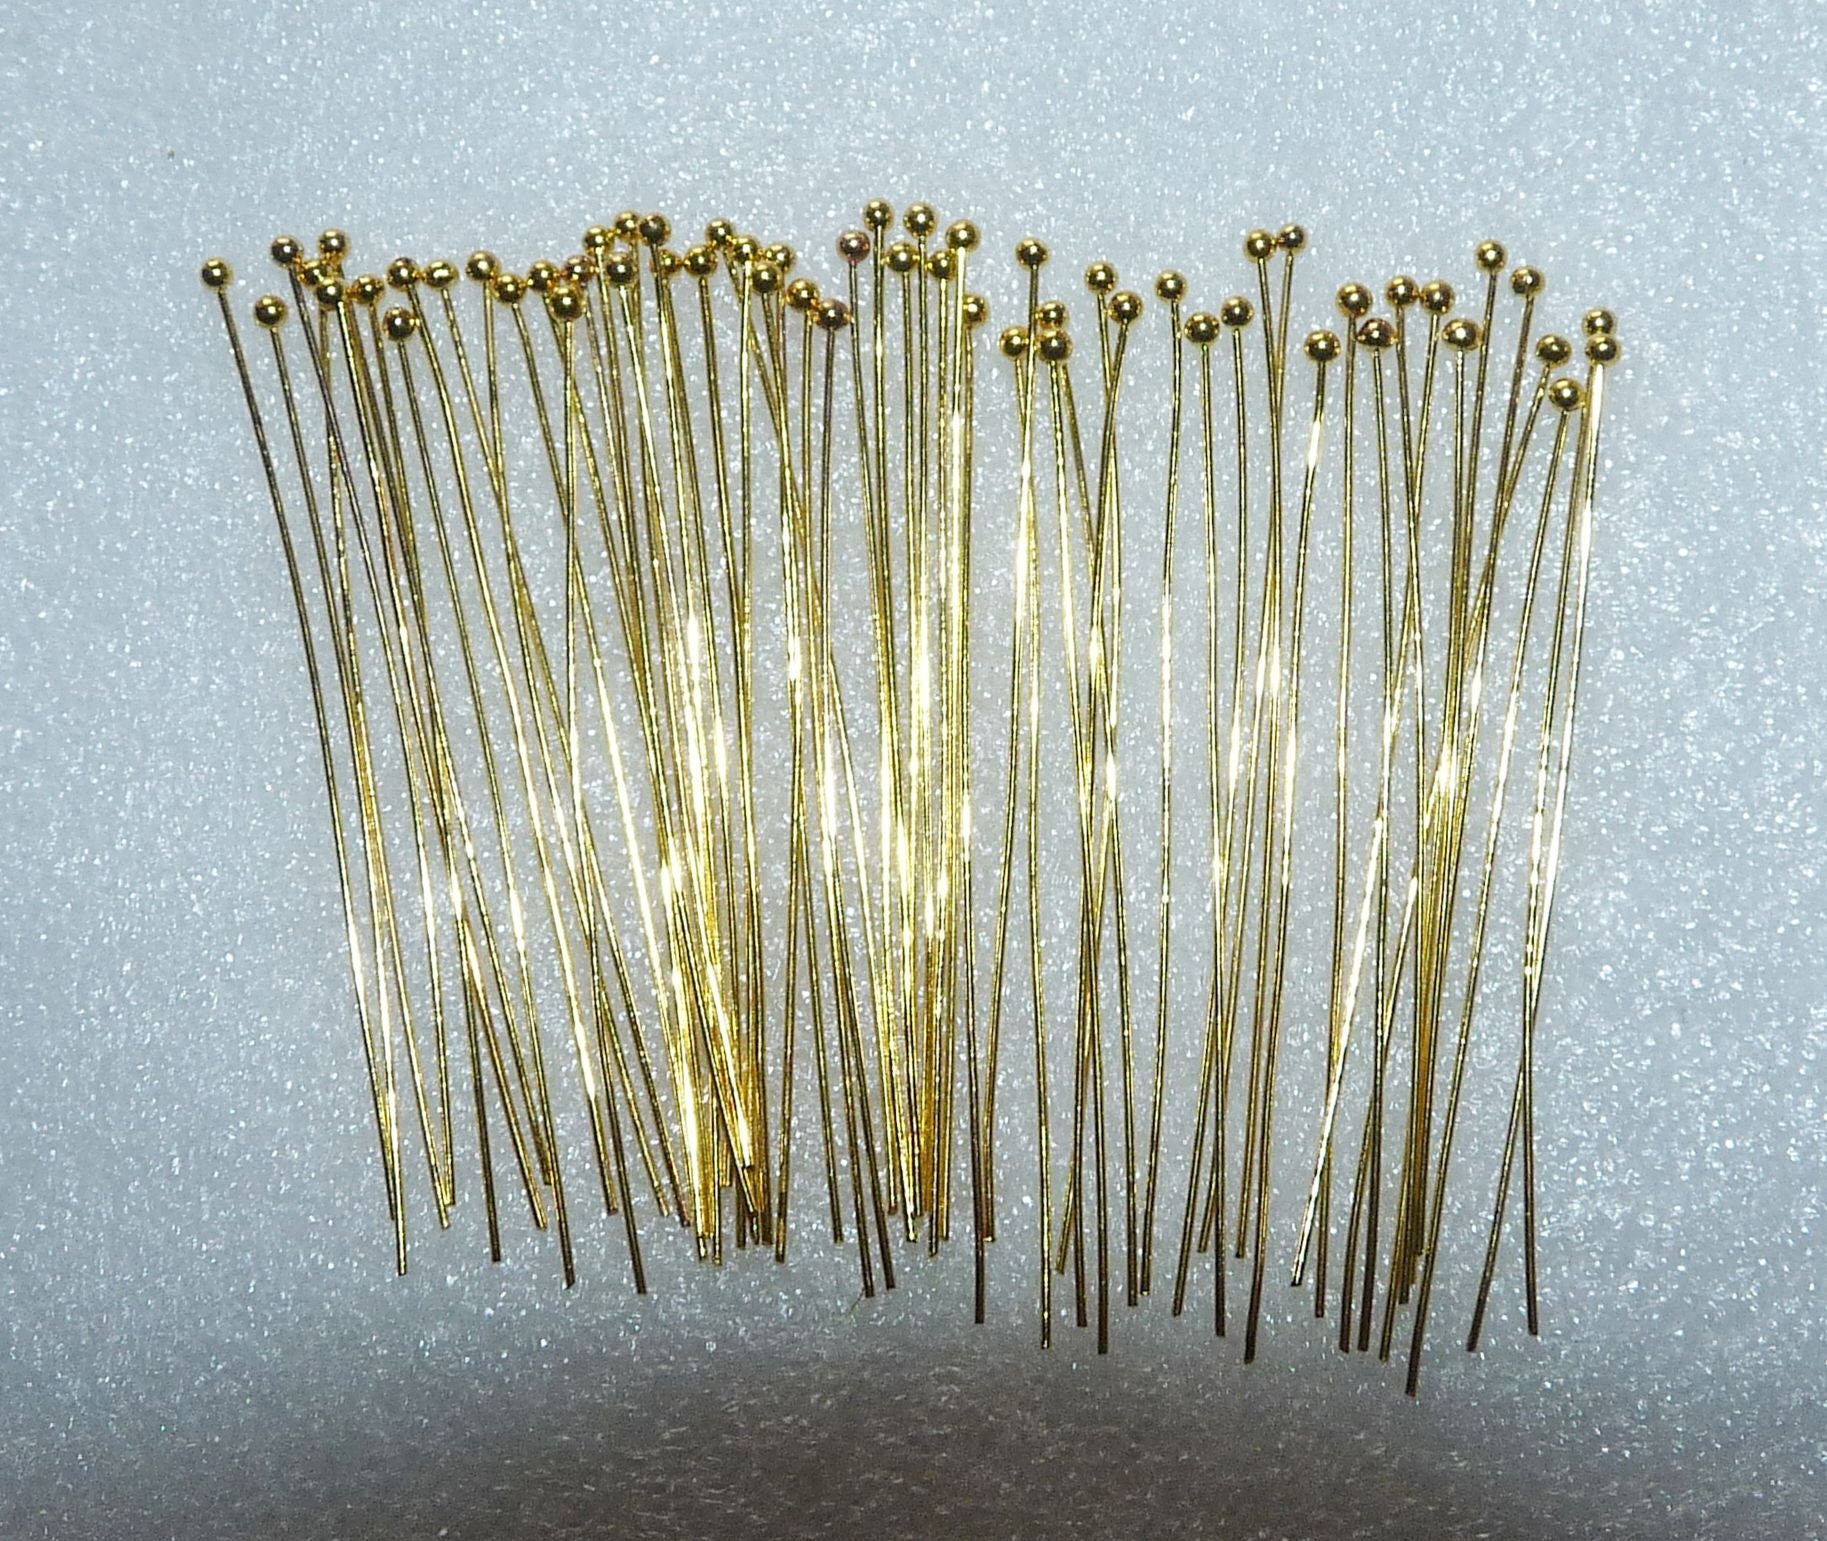 2 Inch Eye Pins Golden For Jewellery Making